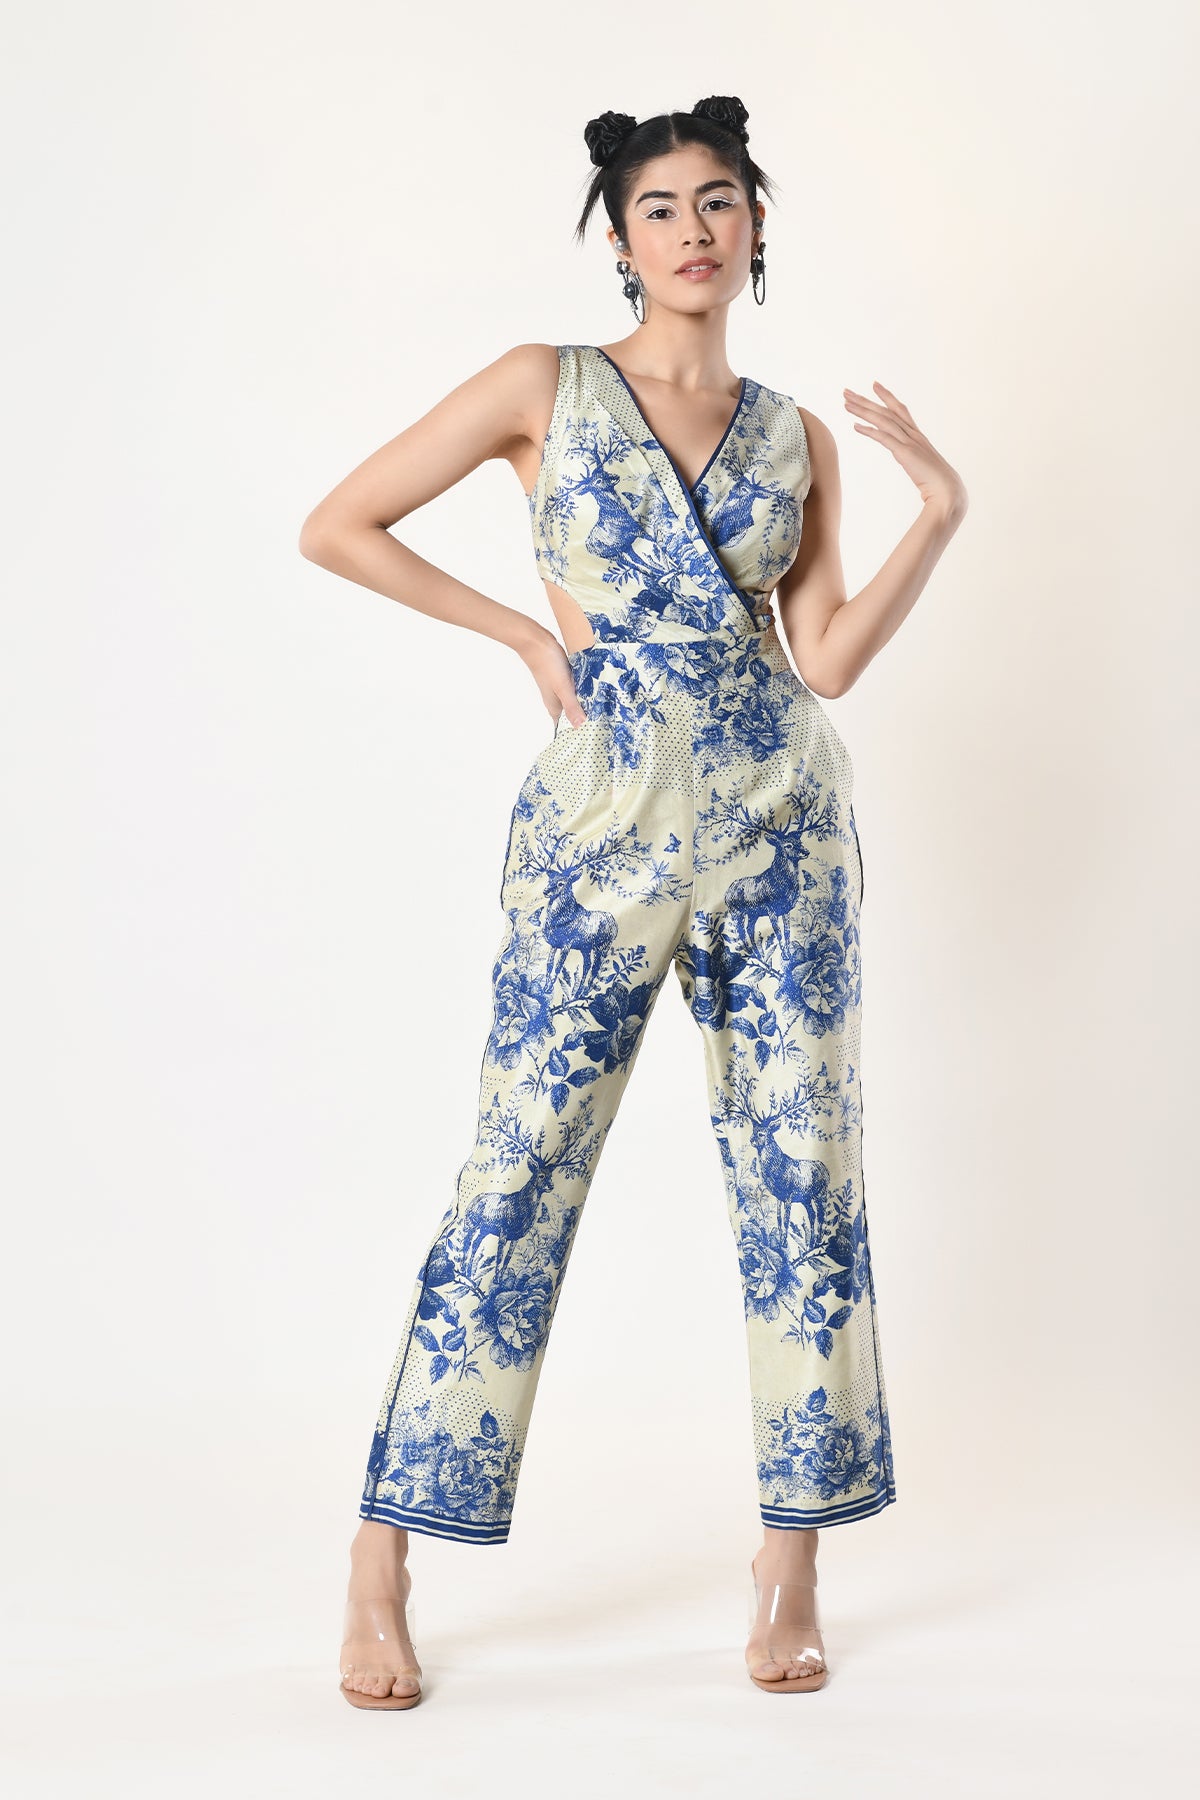 Cut-out long party jumpsuit for graduations | INVITADISIMA